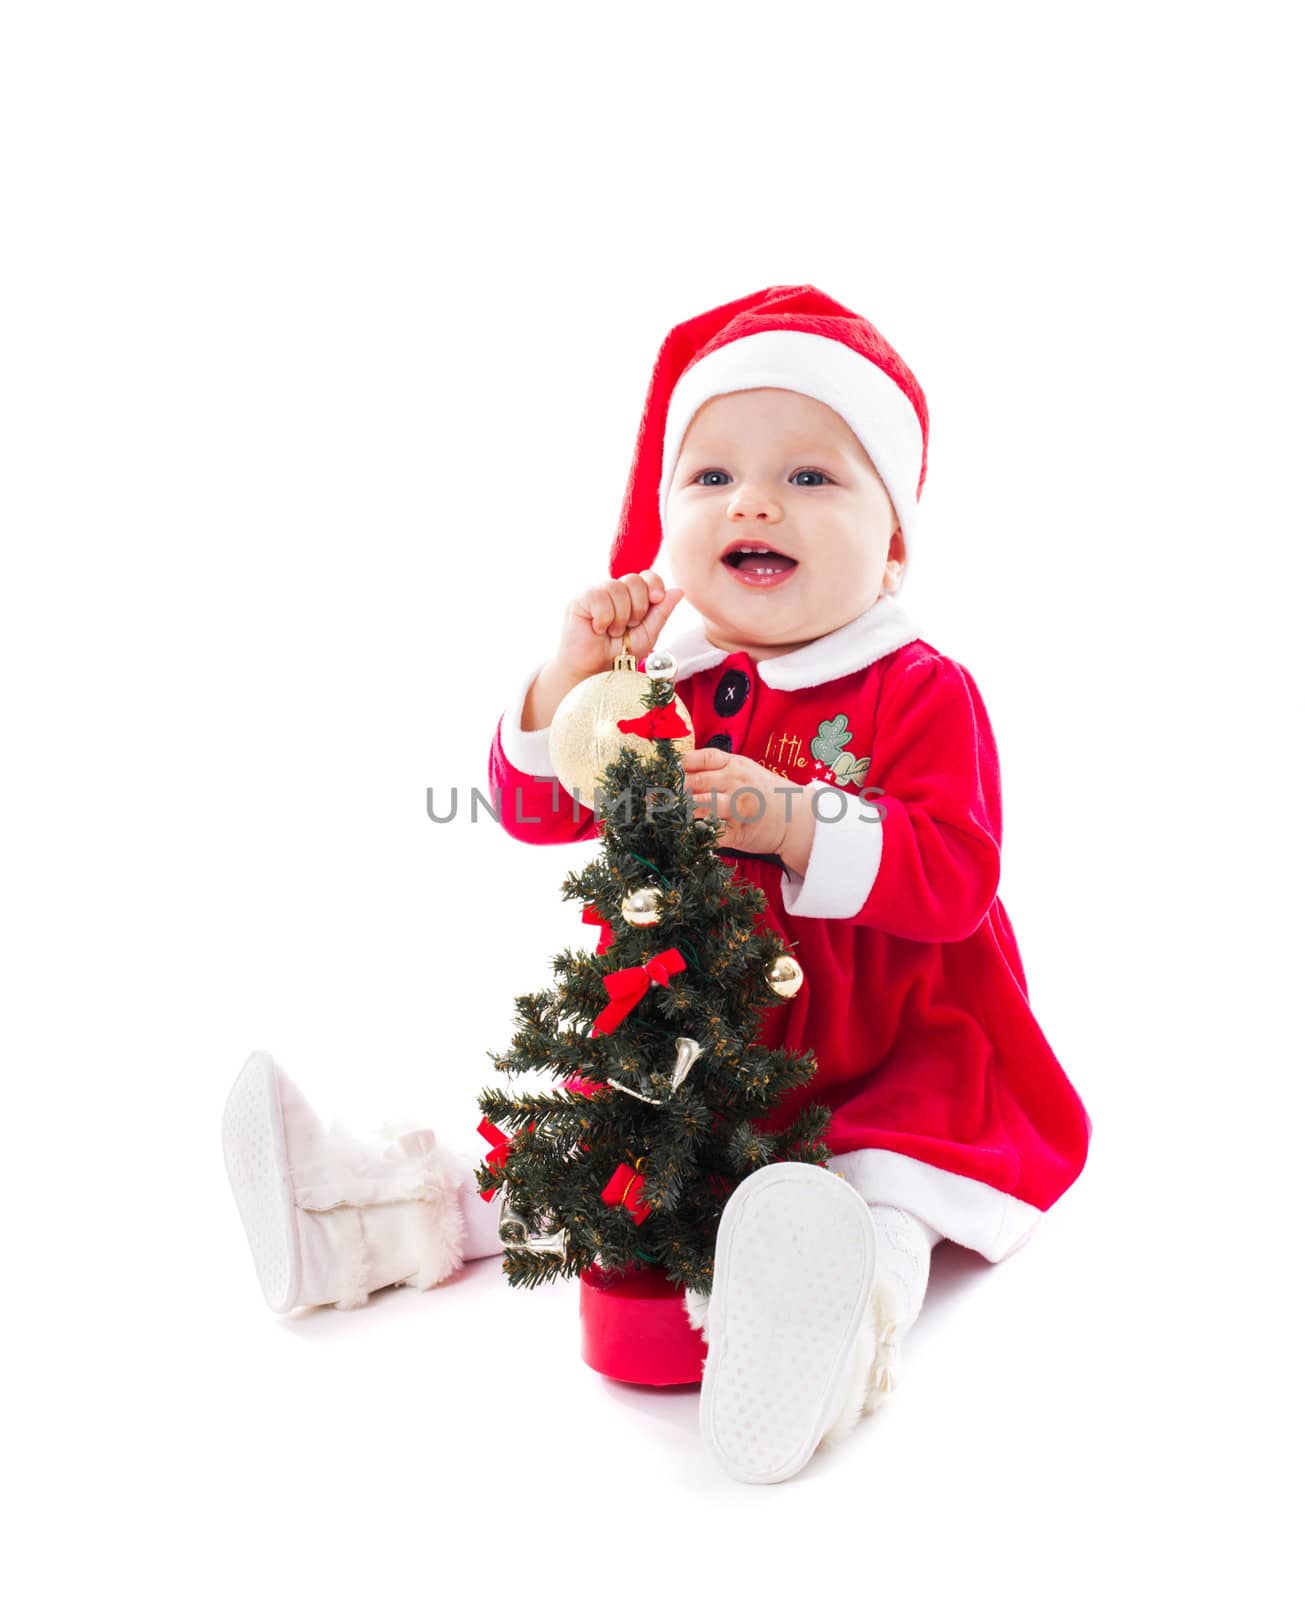 Santa girl wants to decorate fir tree isolated on white